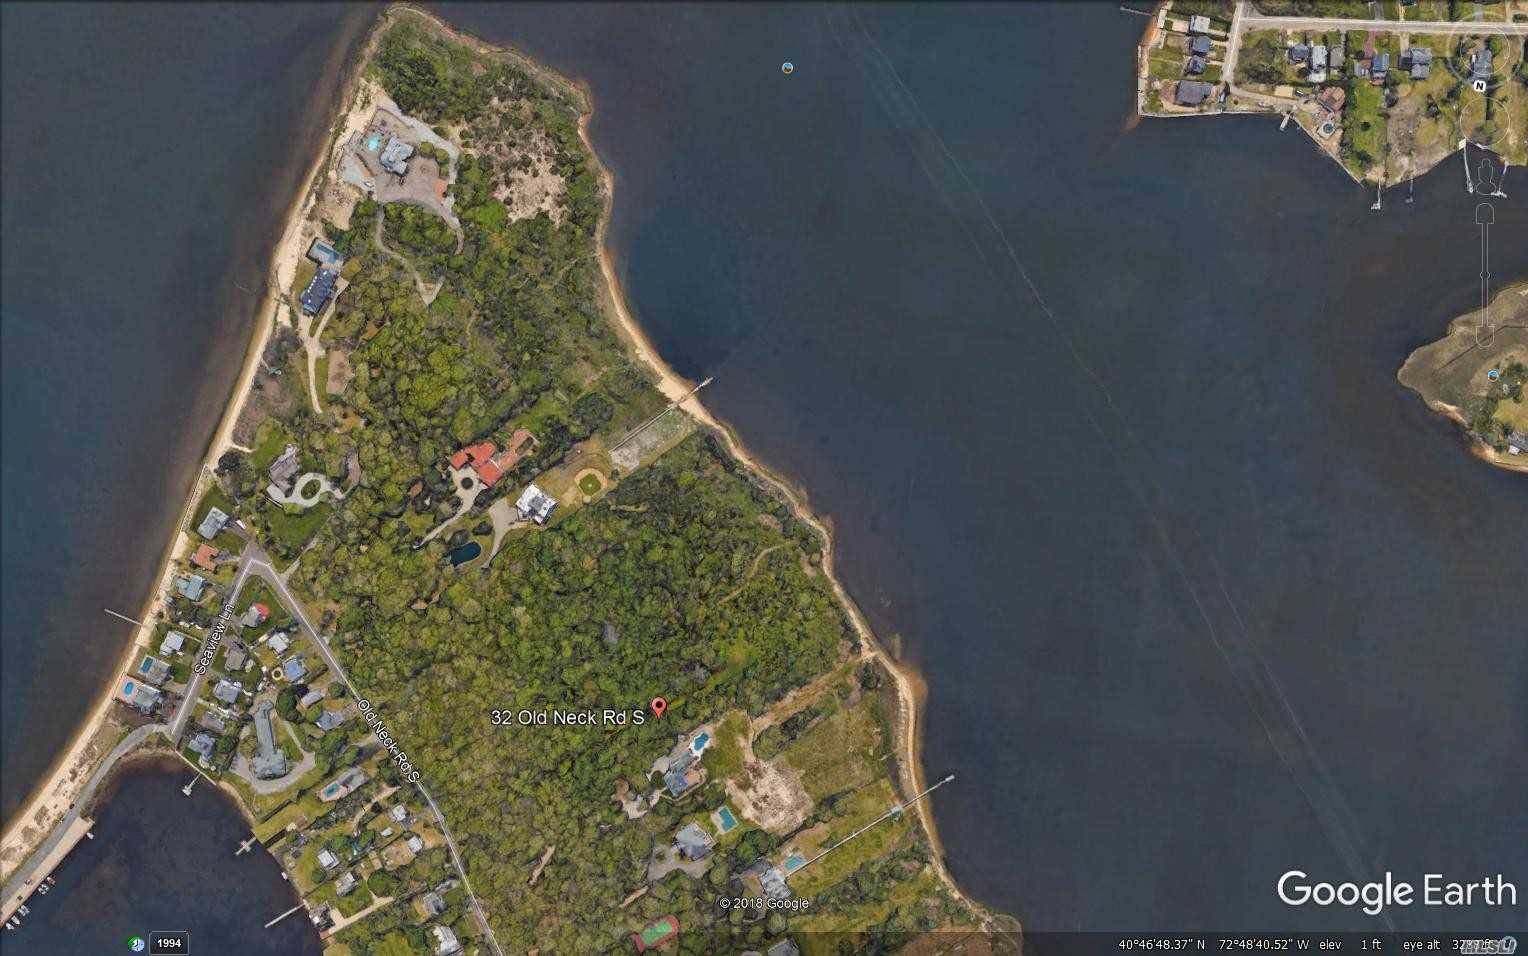 Incredible 4 Acre Waterfront Property That Won't Last At This Price.